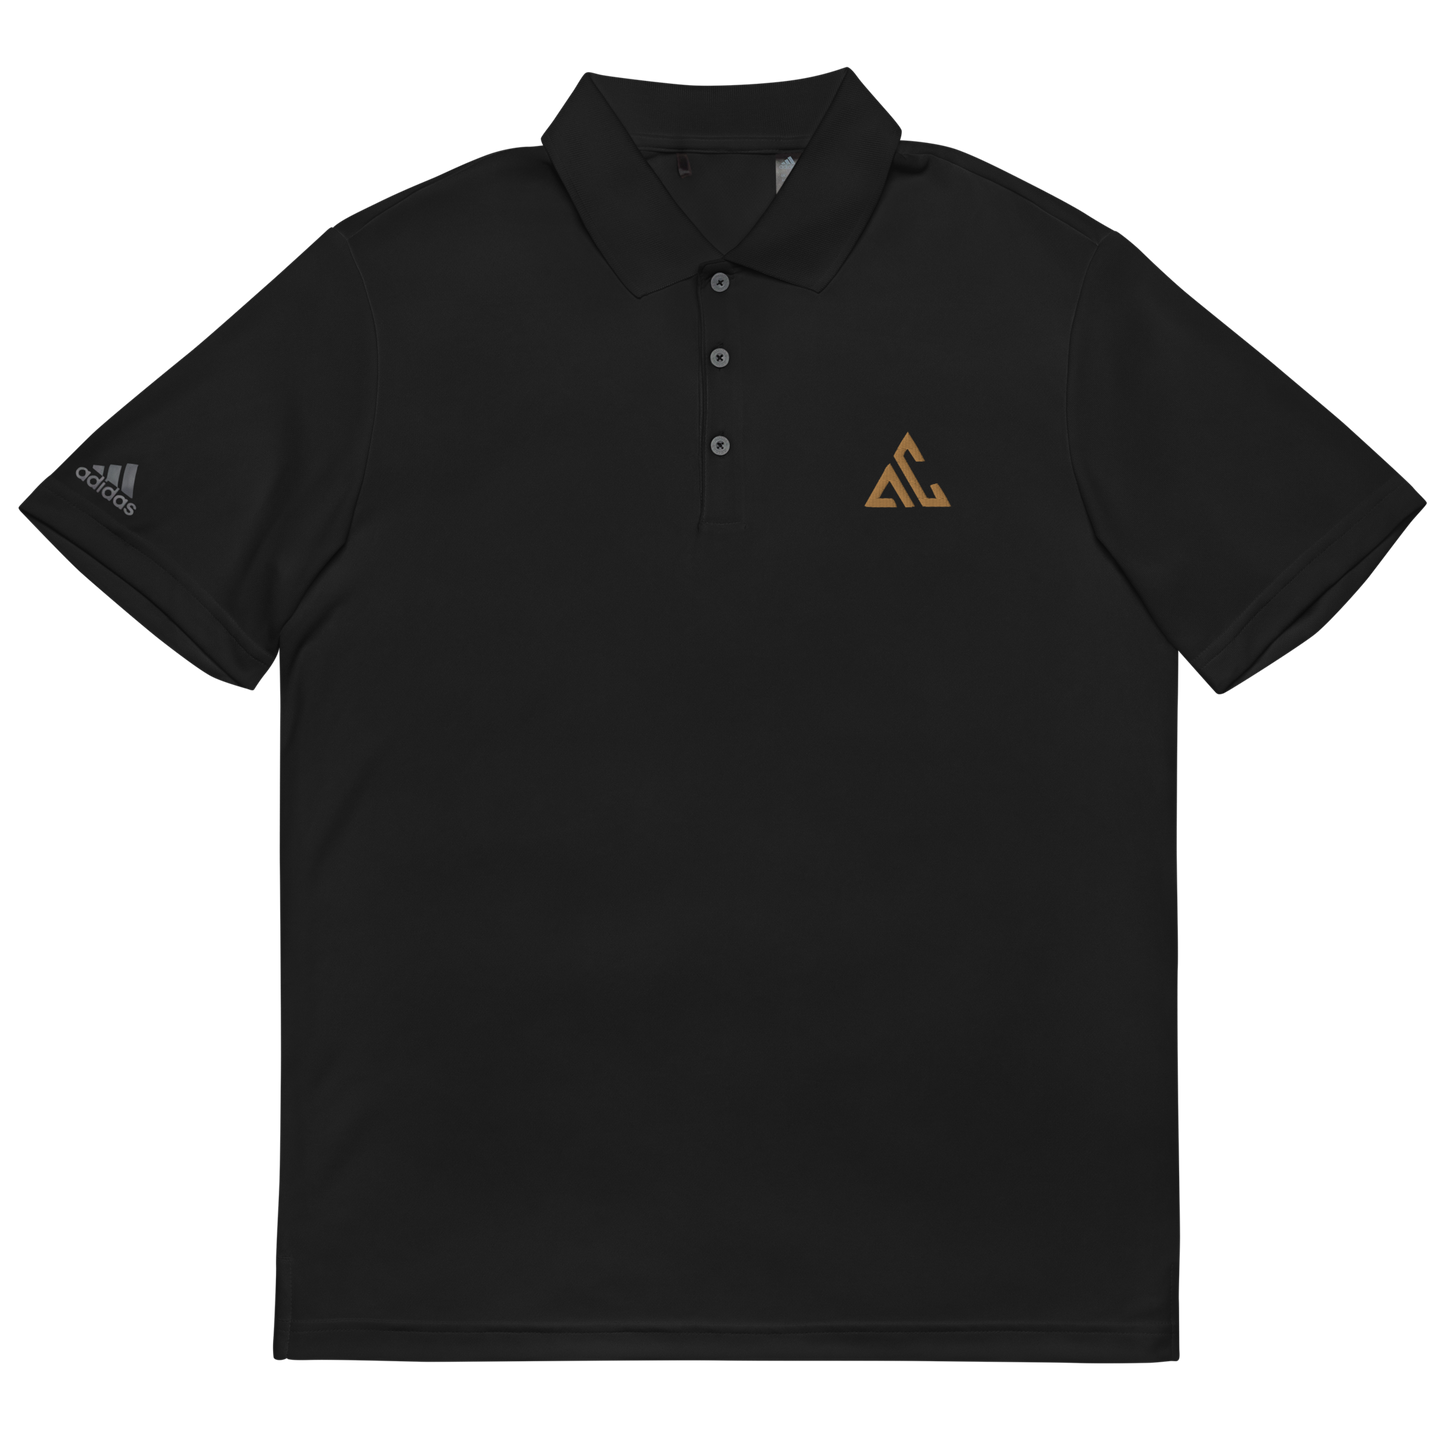 ANDREW CARR ADIDAS PERFORMANCE POLO